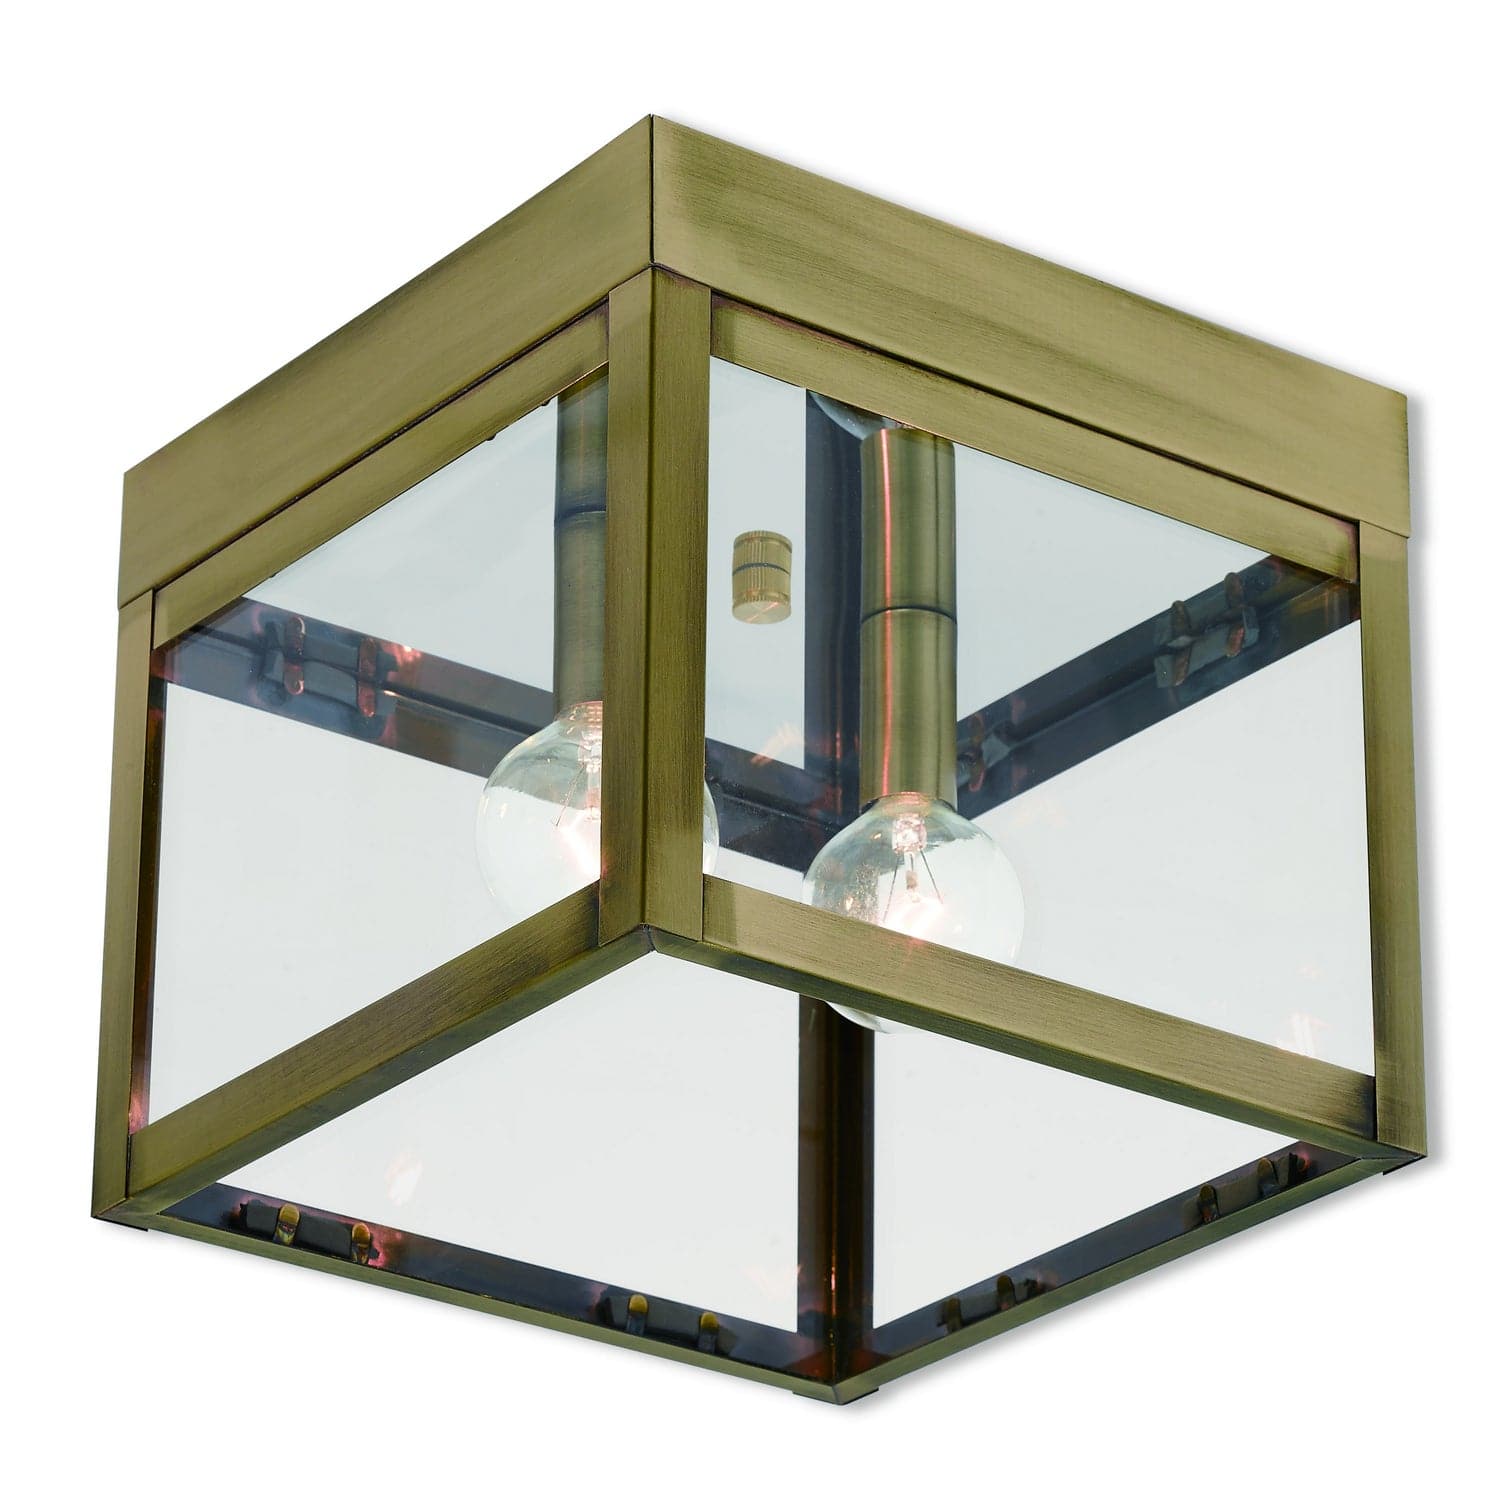 Livex Lighting - 20588-01 - Two Light Outdoor Ceiling Mount - Nyack - Antique Brass w/ Polished Chrome Stainless Steel